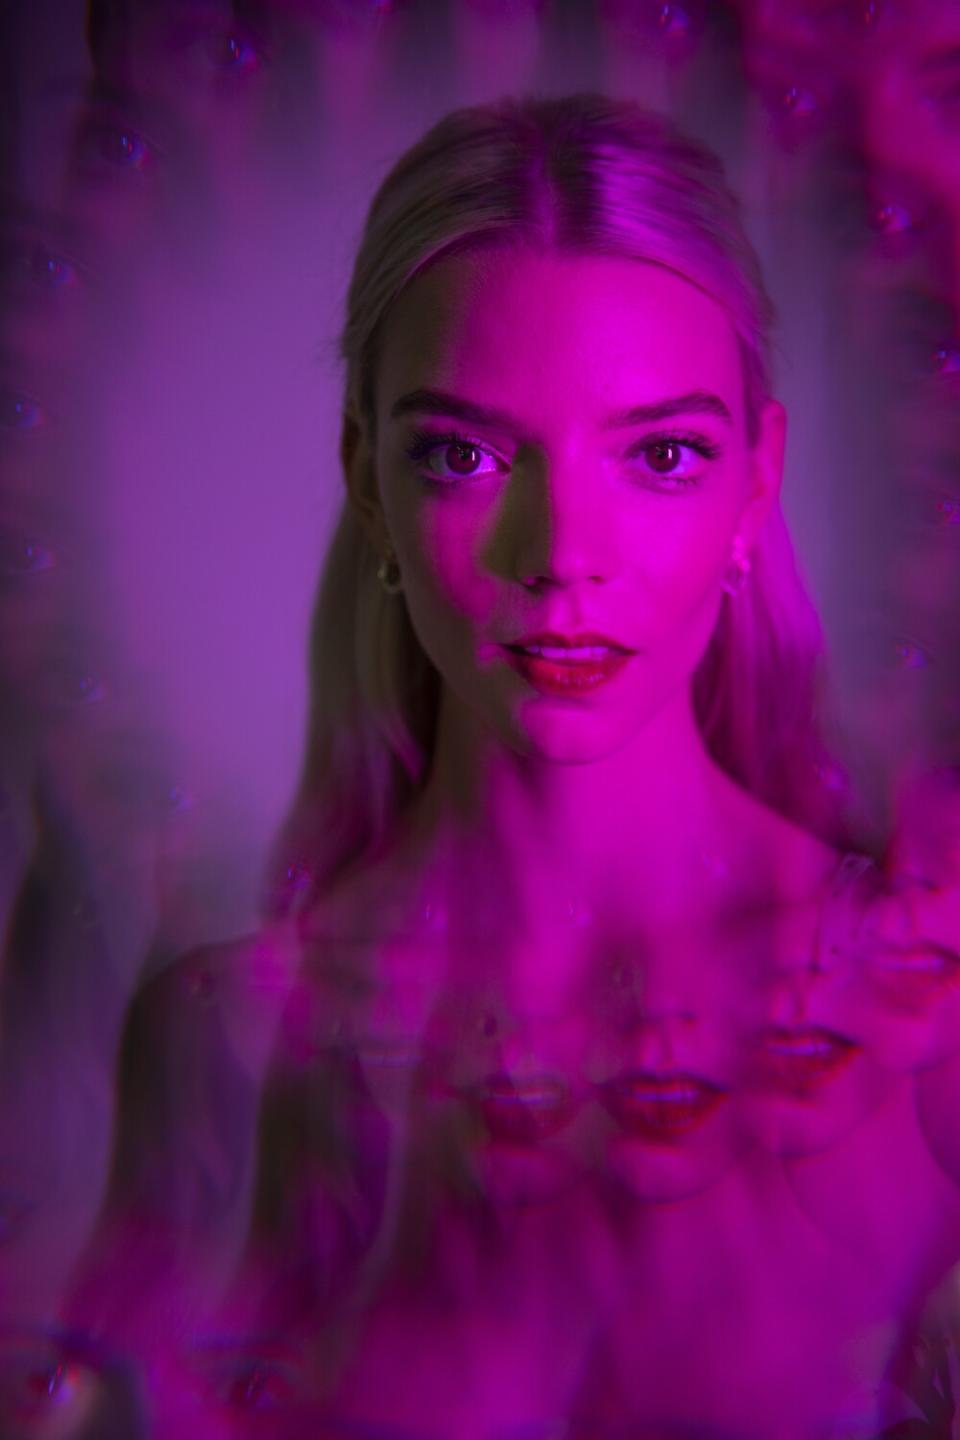 Aug. 6: A woman in a stylized pink lighted image with copies of her mouth on her chest